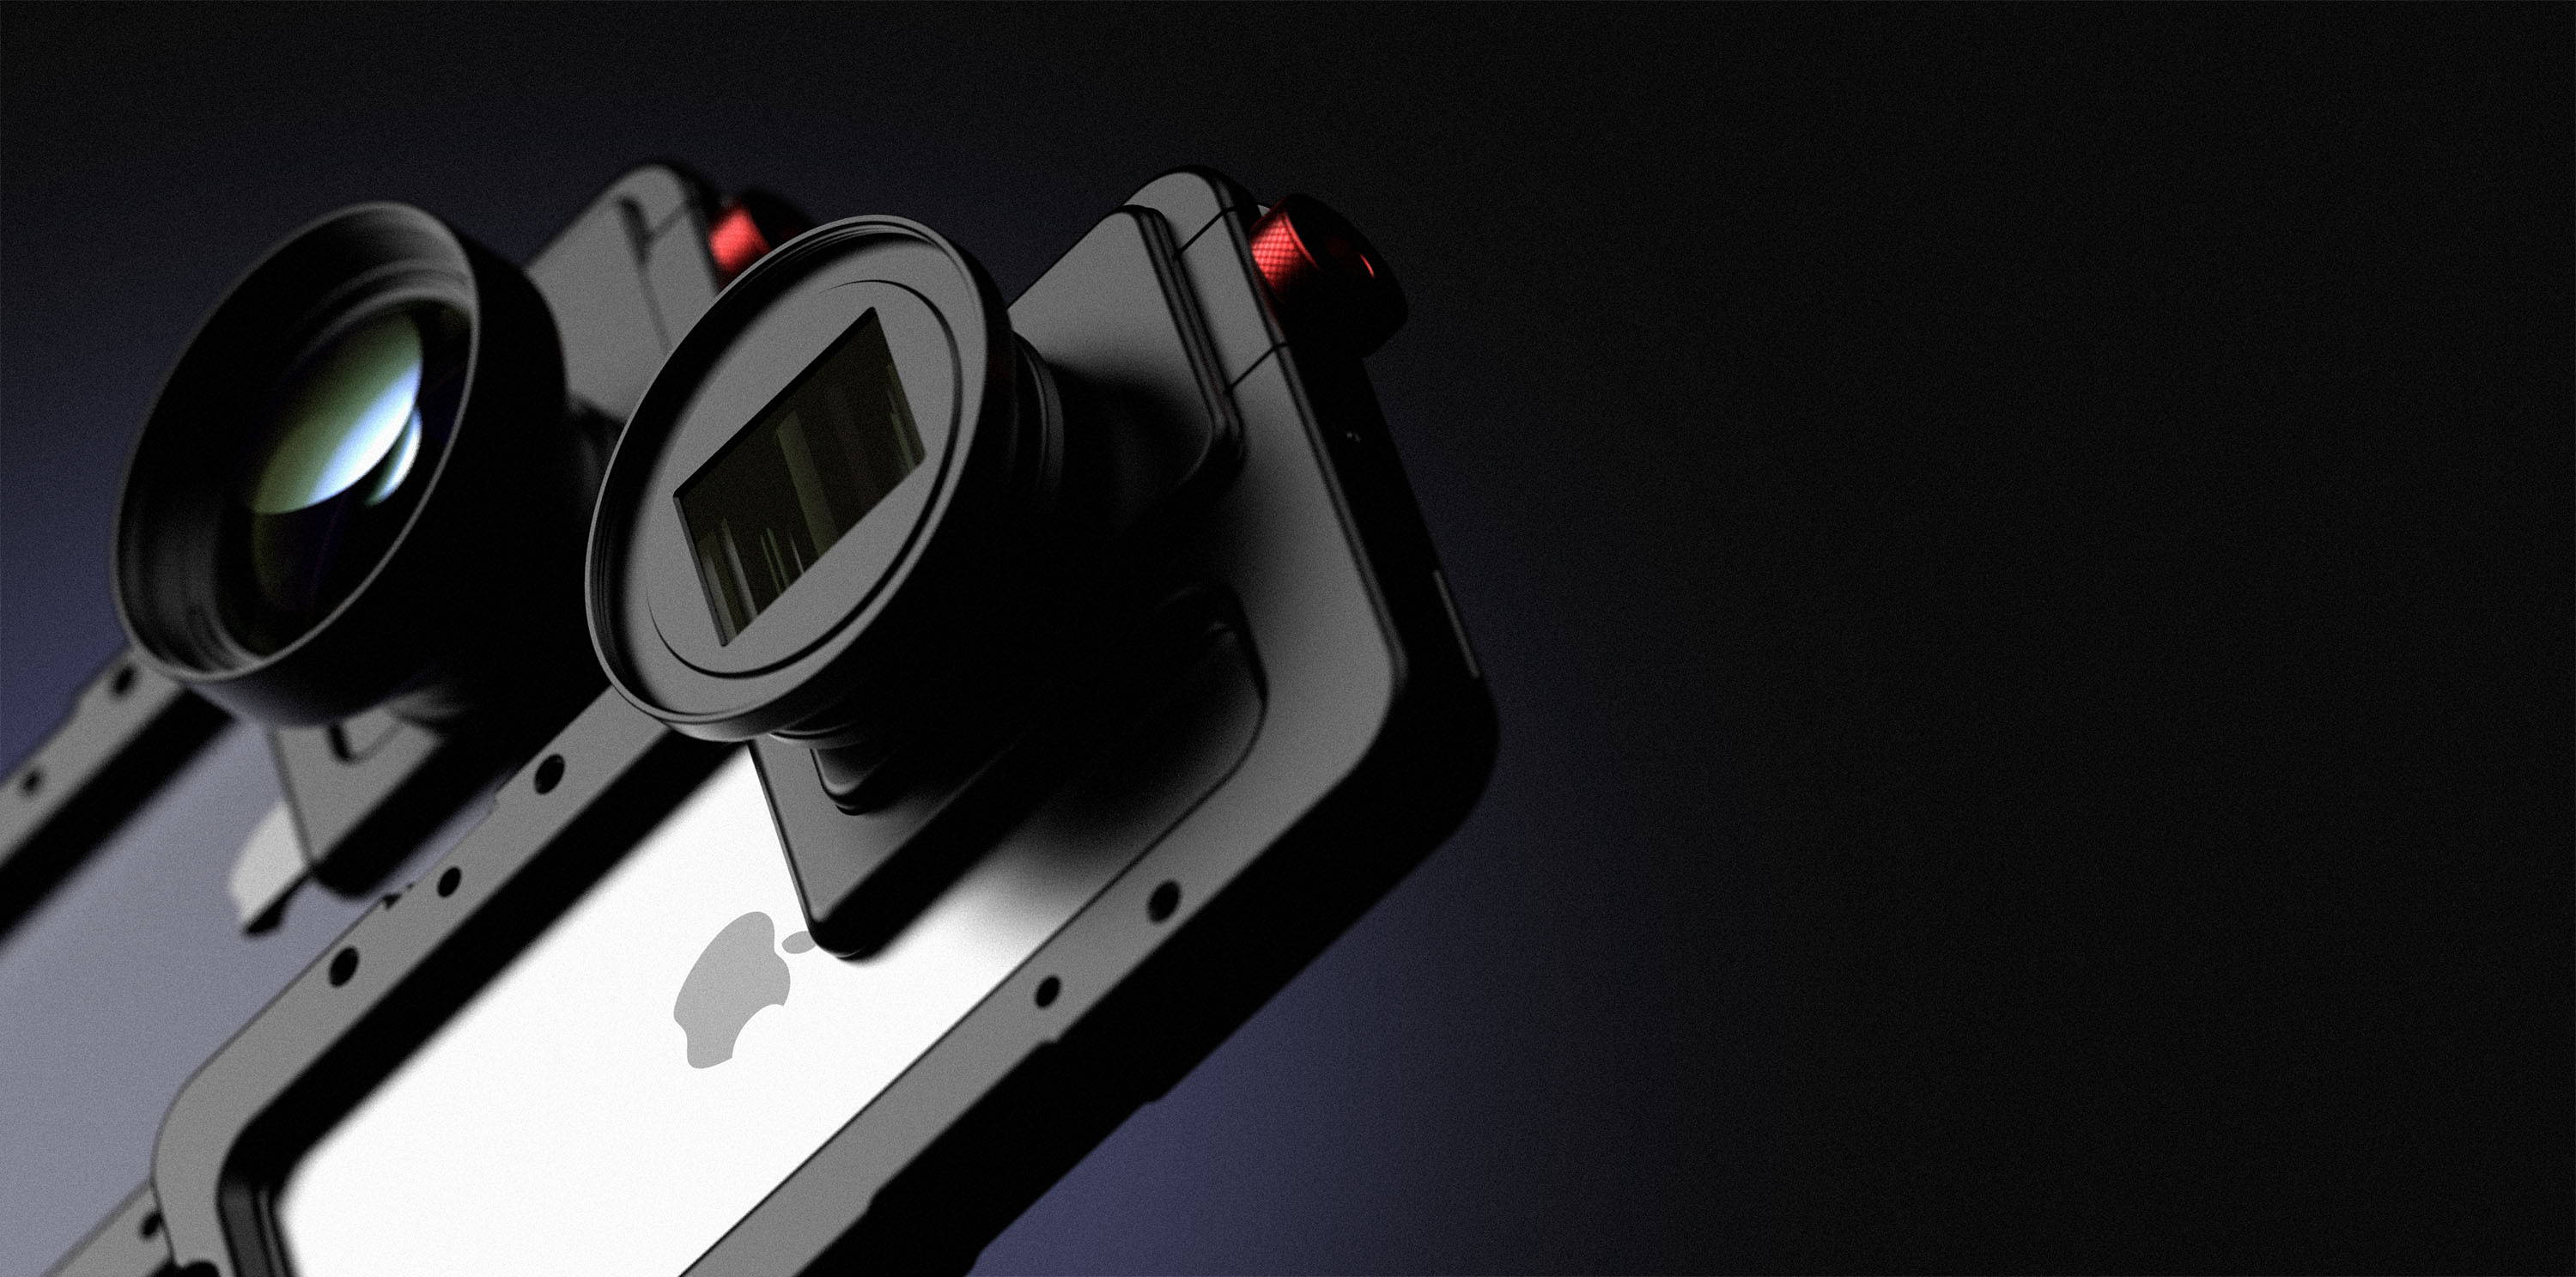 Beastcage for iPhone 15. Professional filmmaking and photography